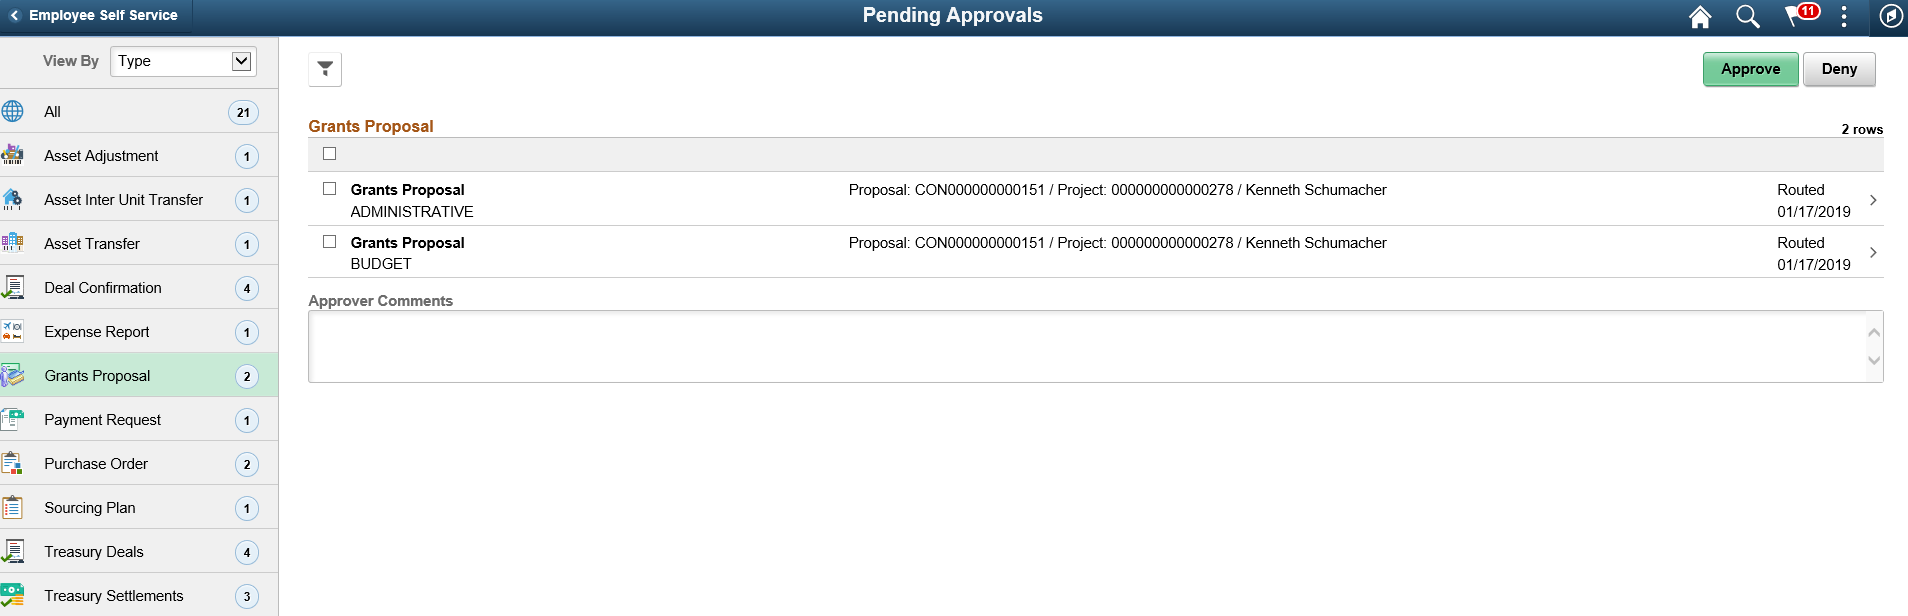 Pending Approvals